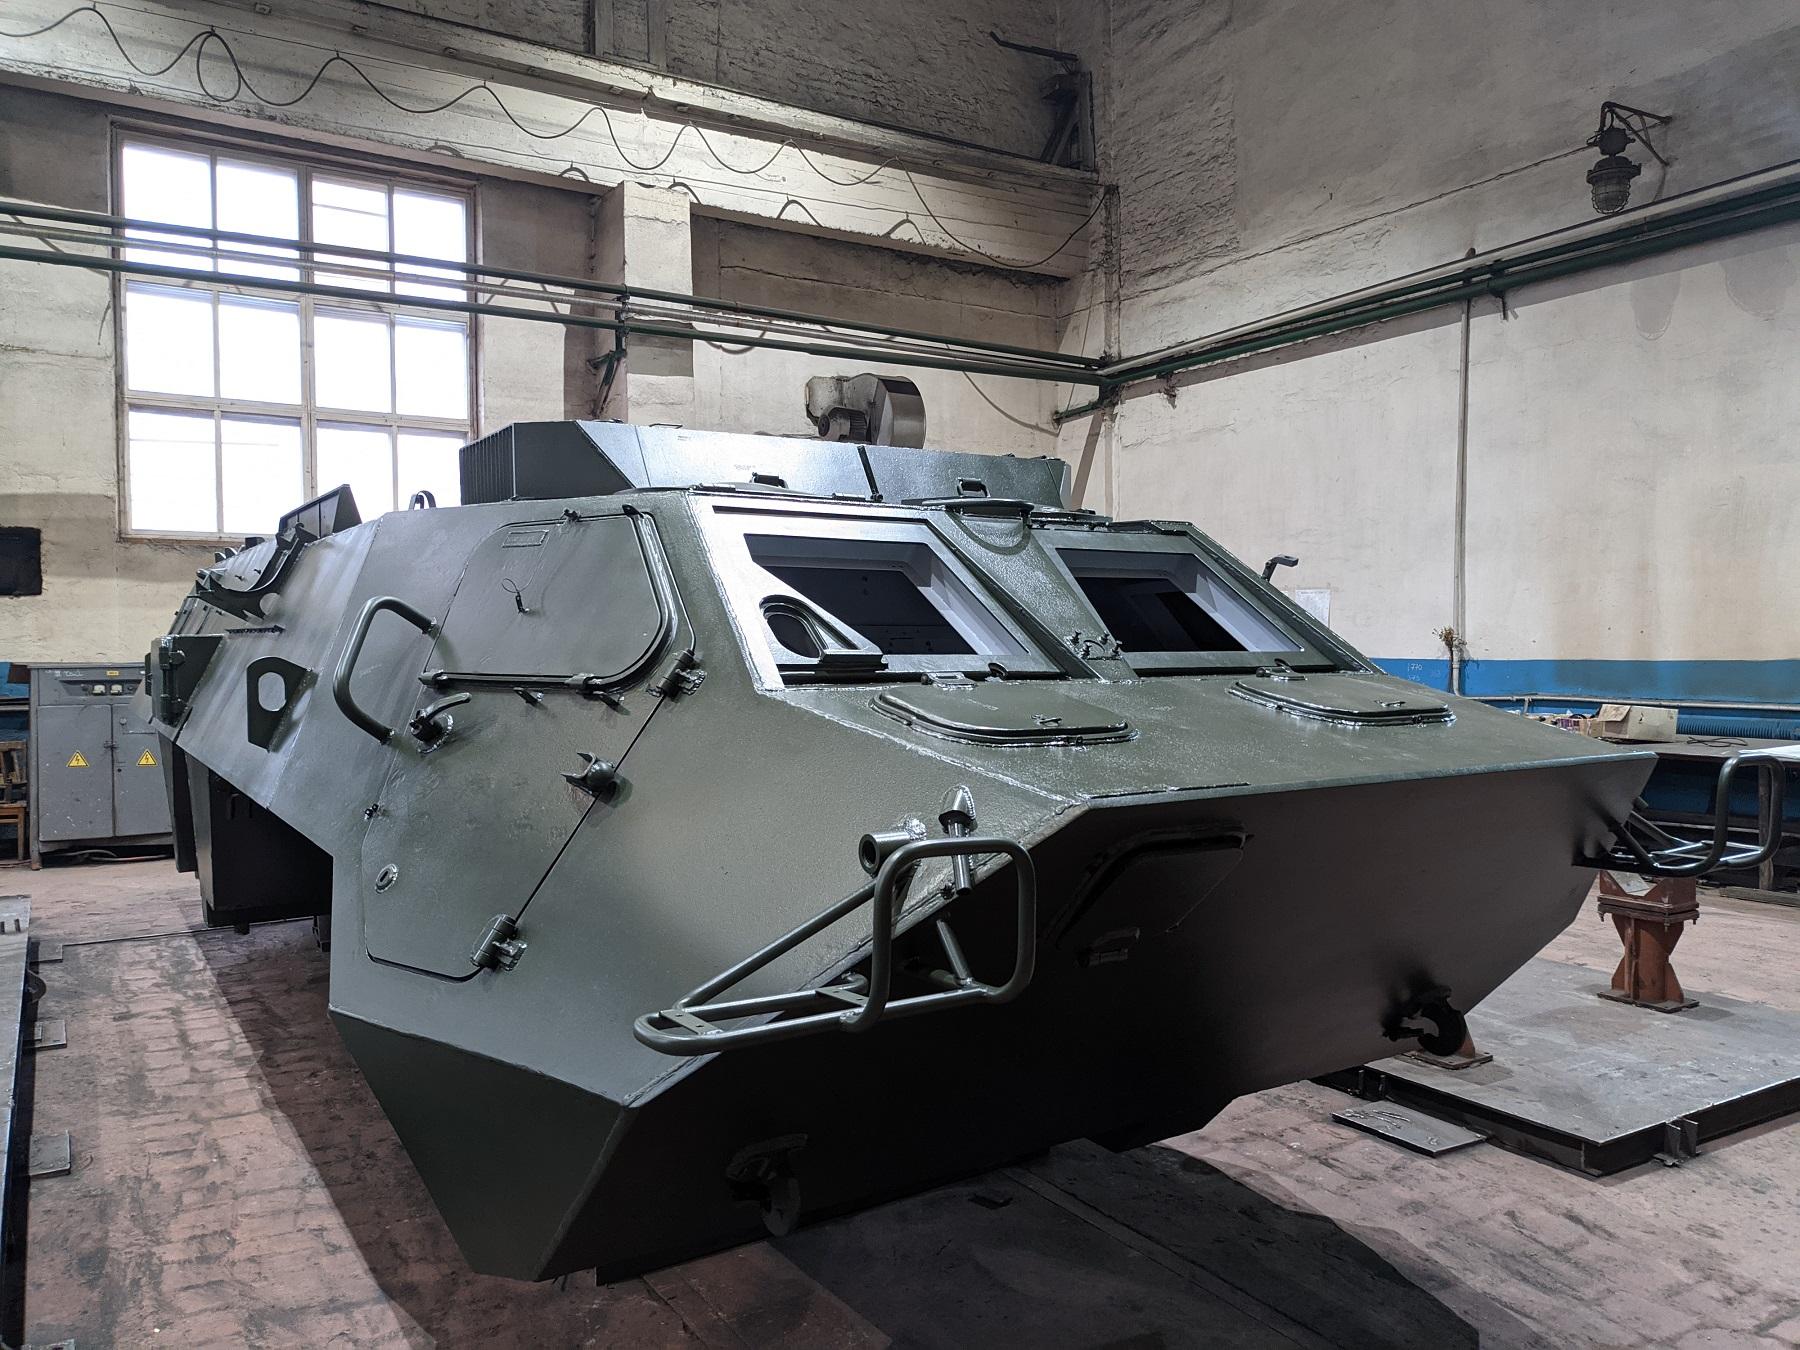 Zhytomyr Armored Plant Ships First BTR-4E Armored Personnel Carrier Body Frame to Customer